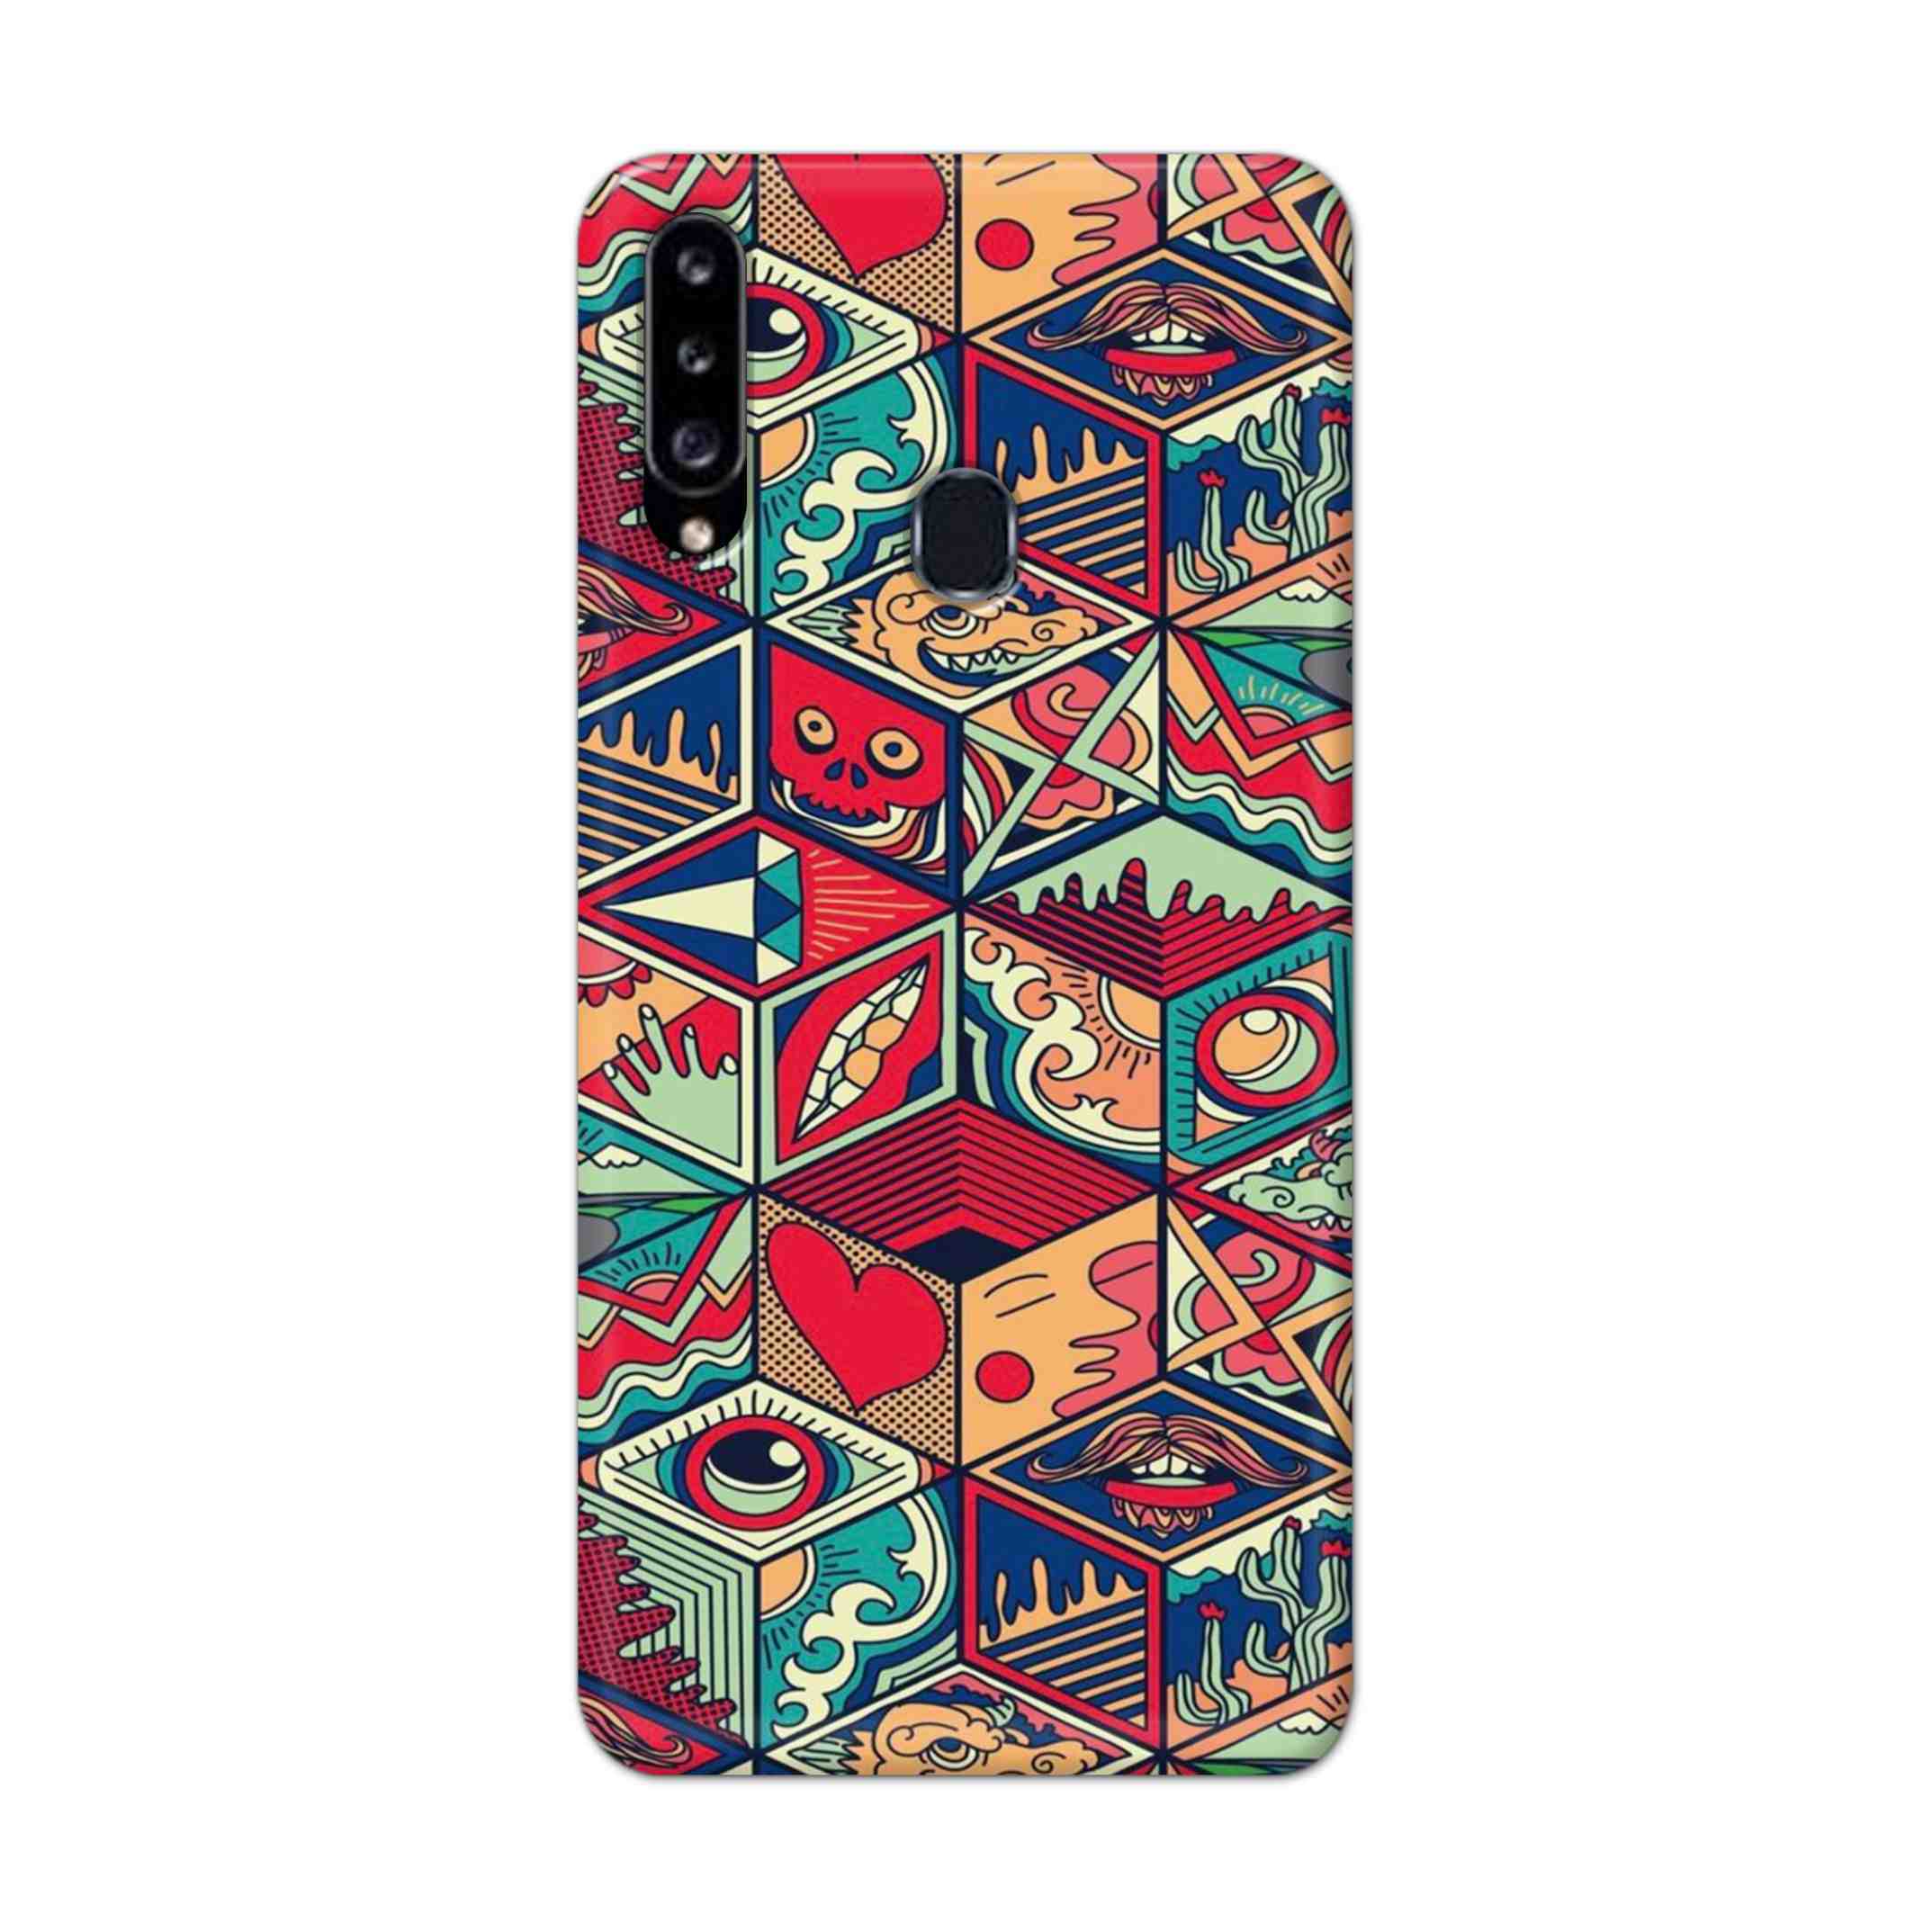 Buy Face Mandala Hard Back Mobile Phone Case Cover For Samsung Galaxy A21 Online